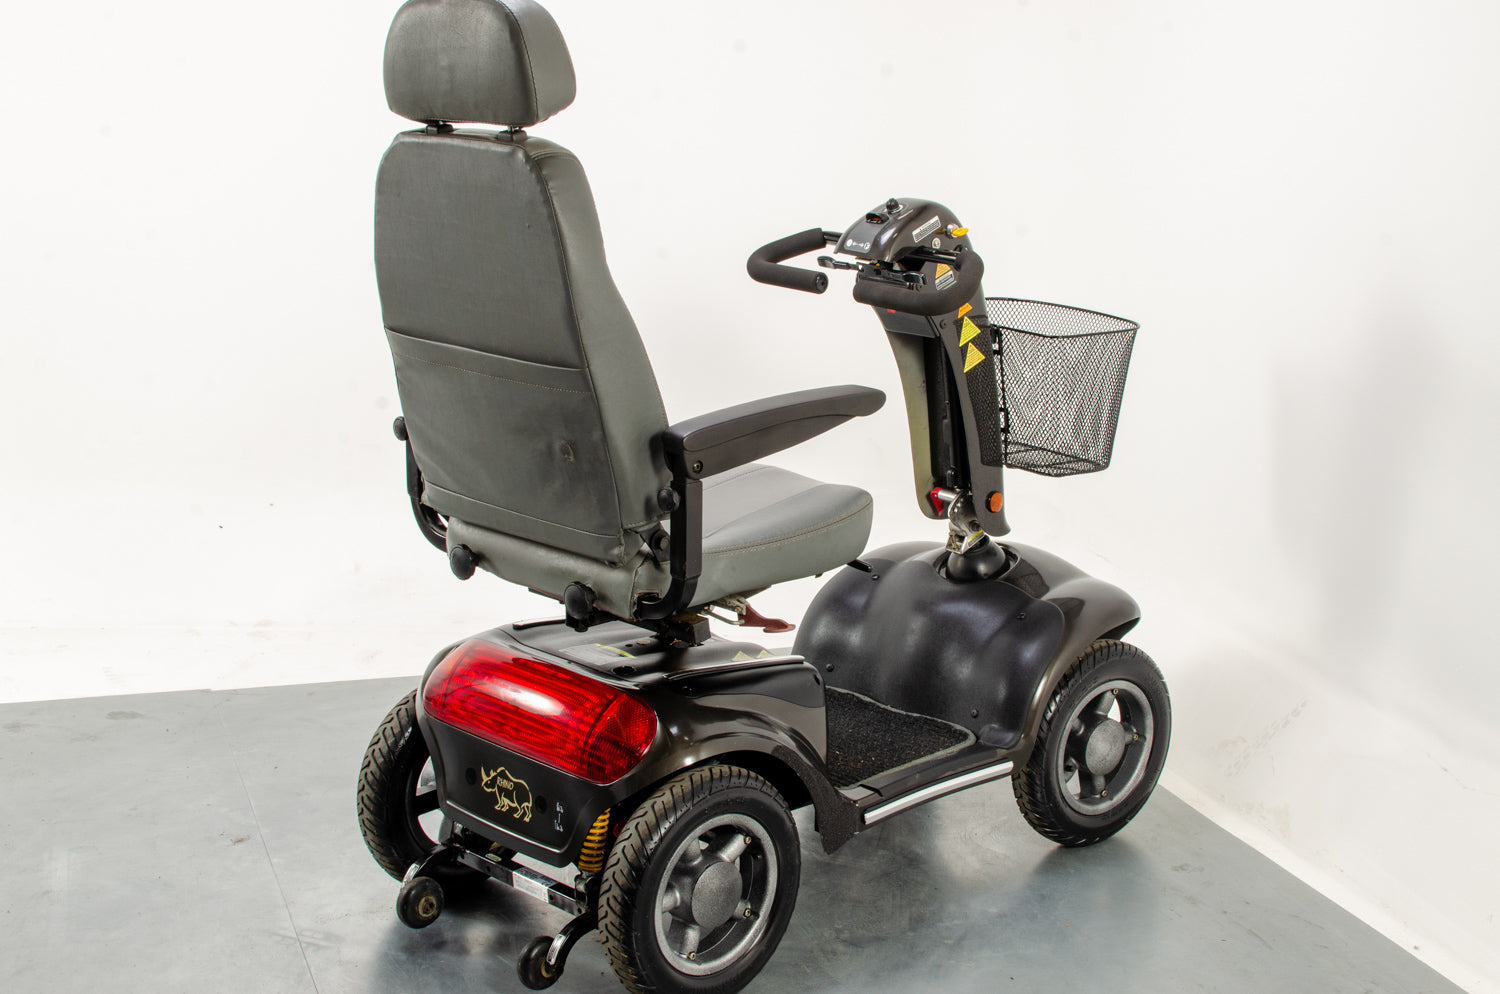 Sterling Diamond 8mph Used Mobility Scooter Comfy Suspension Road Pavement